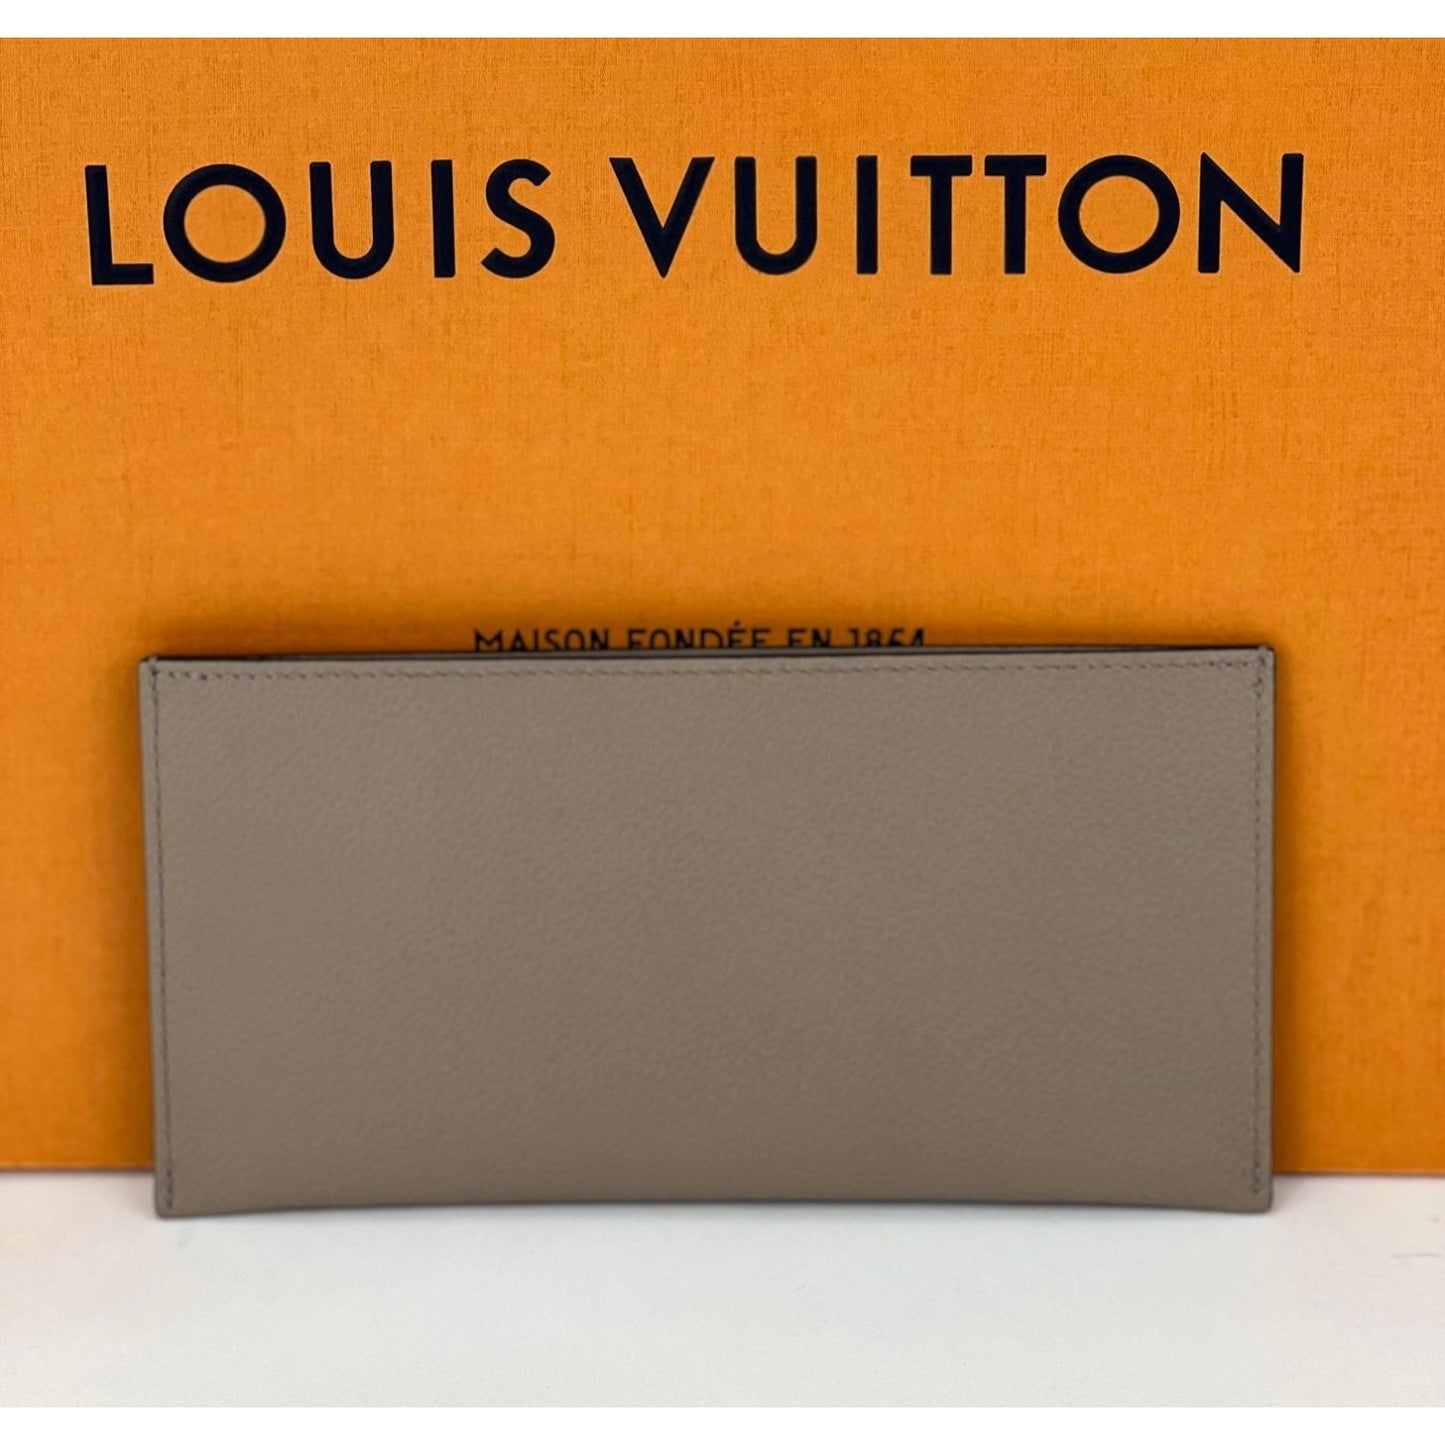 Louis Vuitton receipt for proof that it is real.